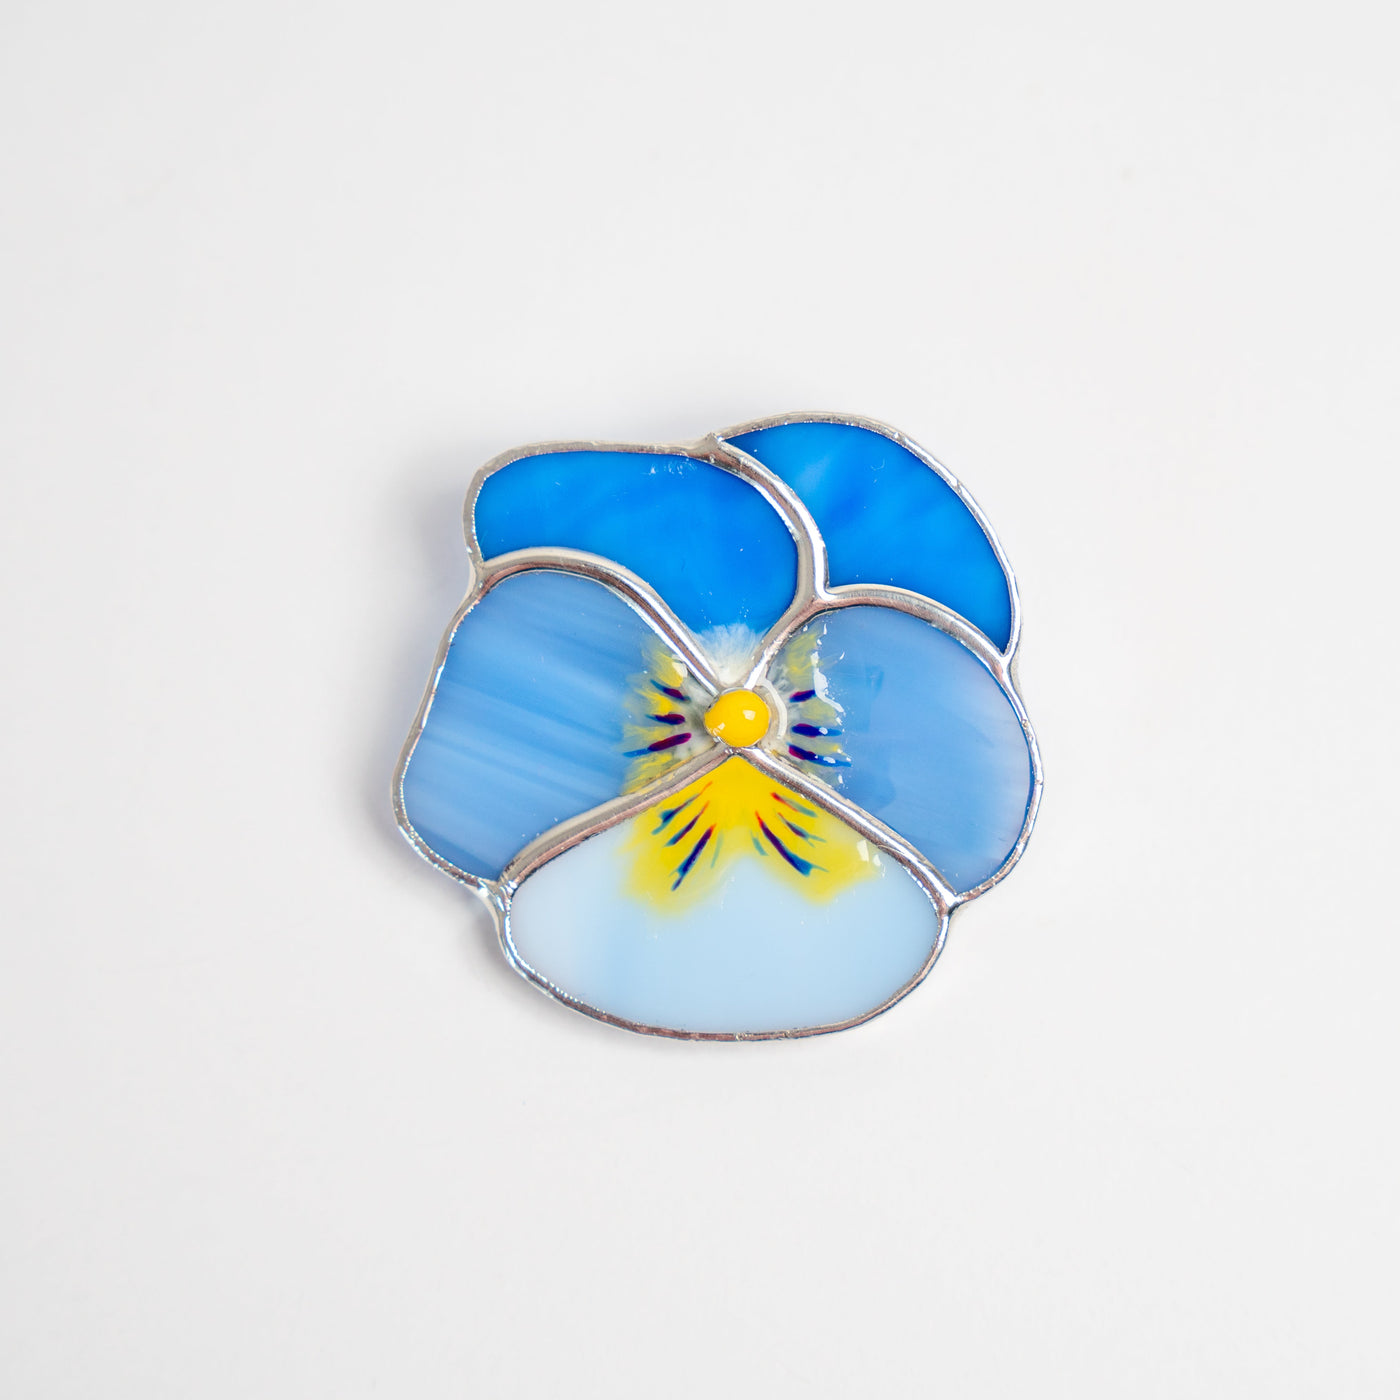 Stained glass different shades of blue with yellow inside pansy flower brooch